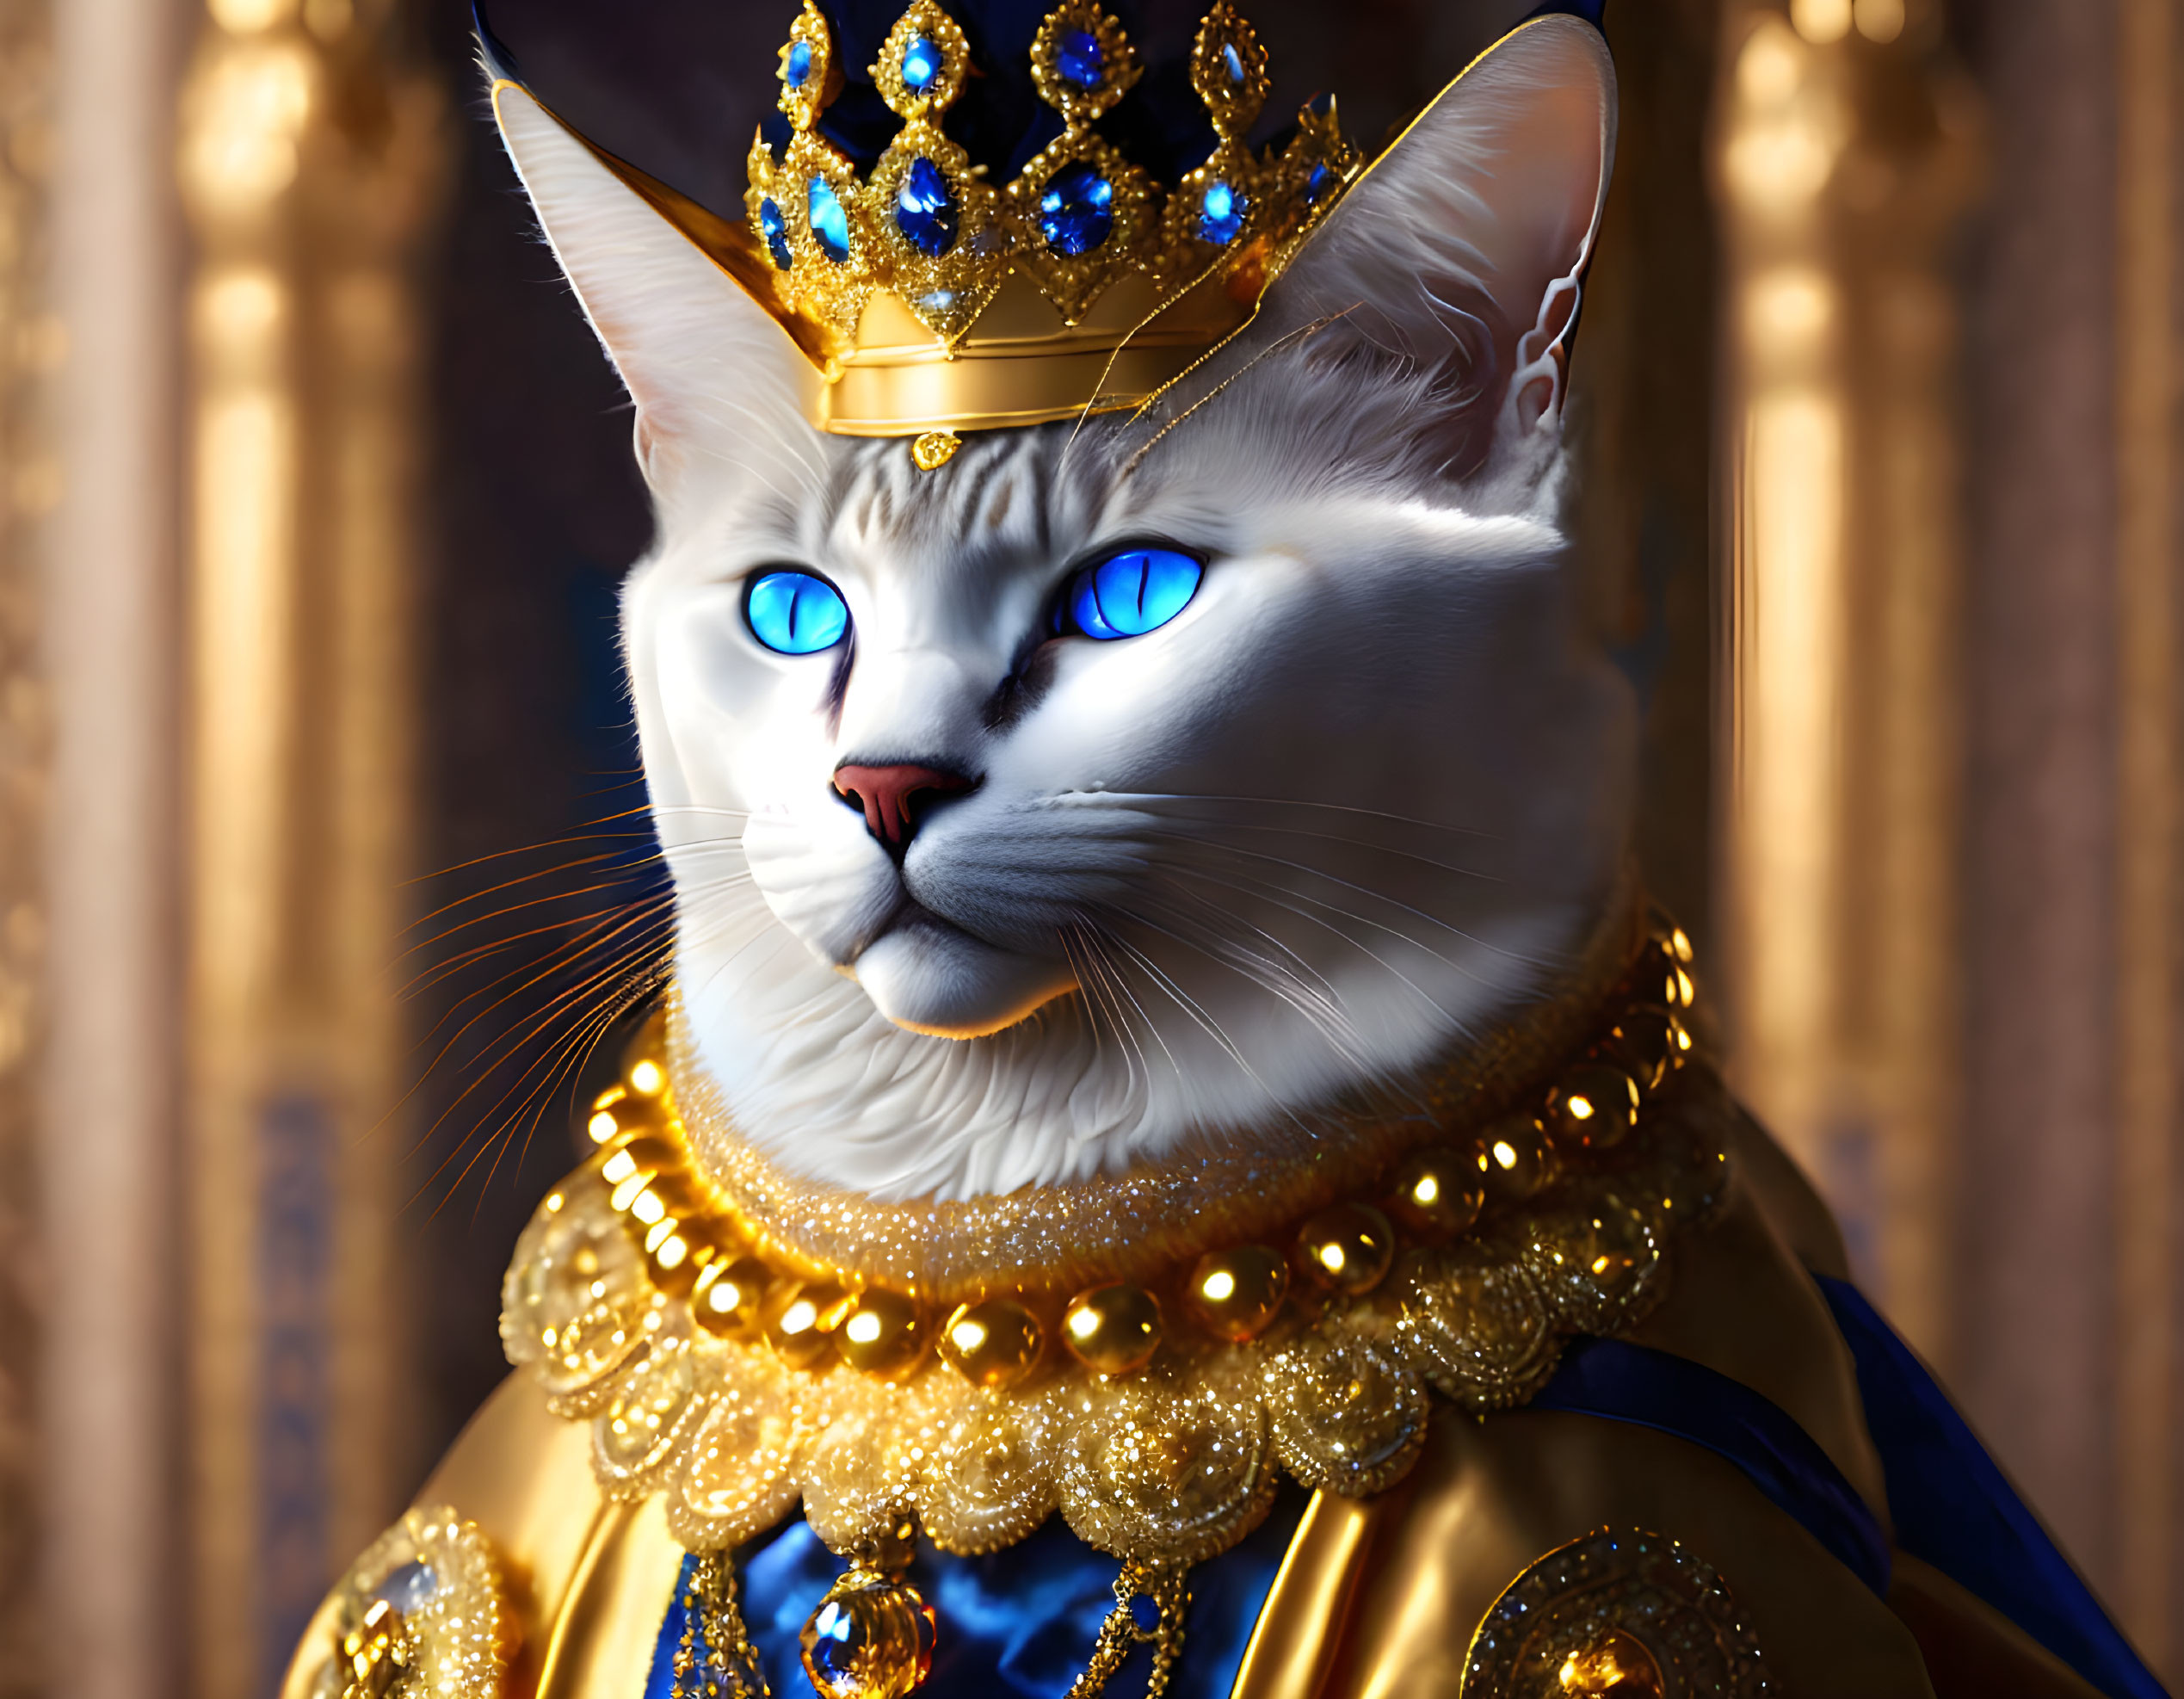 White Cat Wearing Golden Crown and Regal Attire